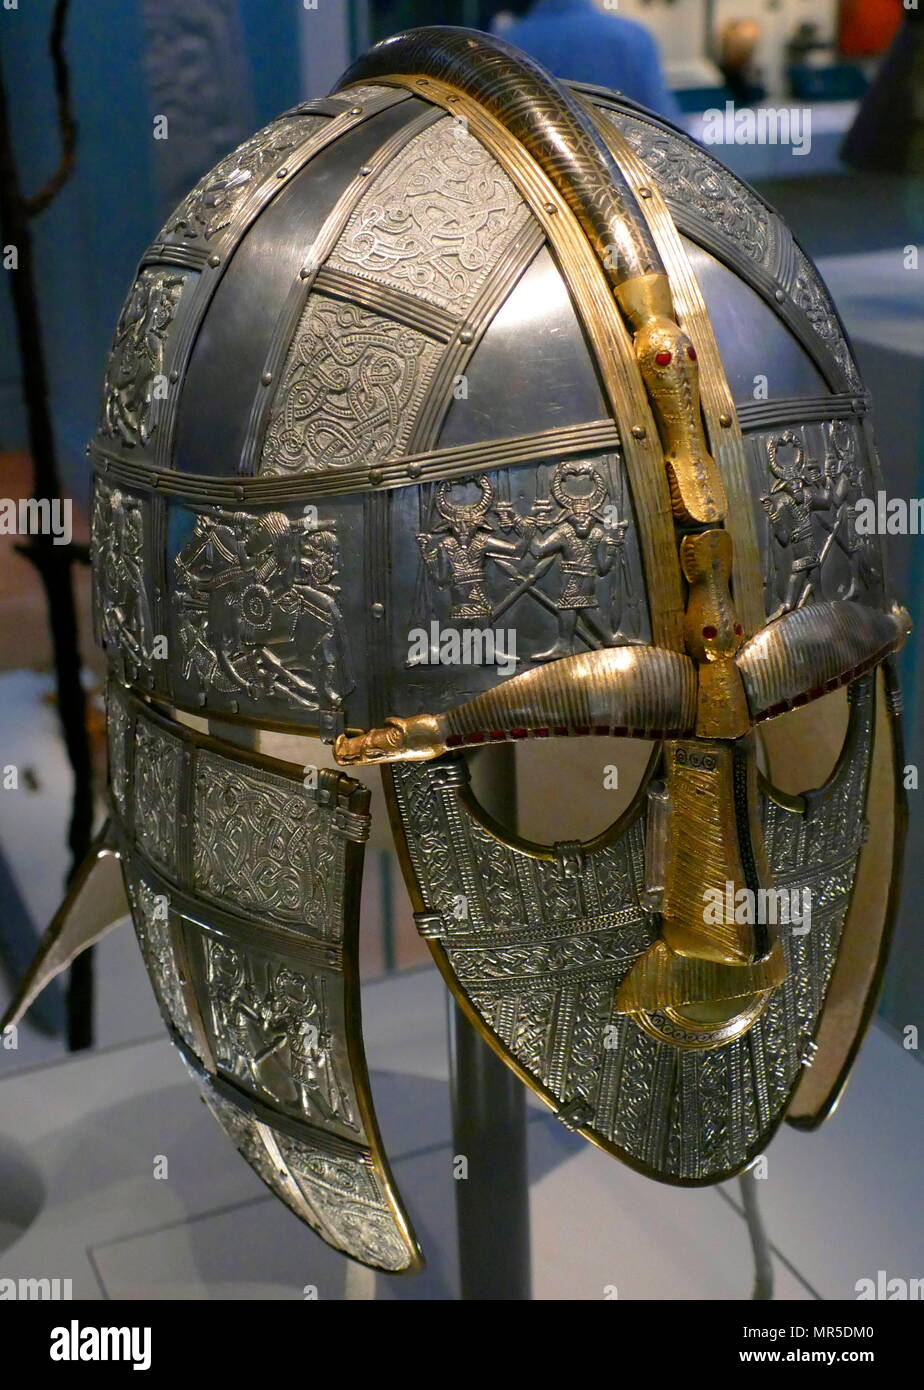 Reconstruction Of The Sutton Hoo Helmet A Decorated Anglo Saxon Helmet Discovered During The 1939 Excavation Of The Sutton Hoo Ship Burial Buried Around 625 Ad It Is Believed To Have Been The Helmet